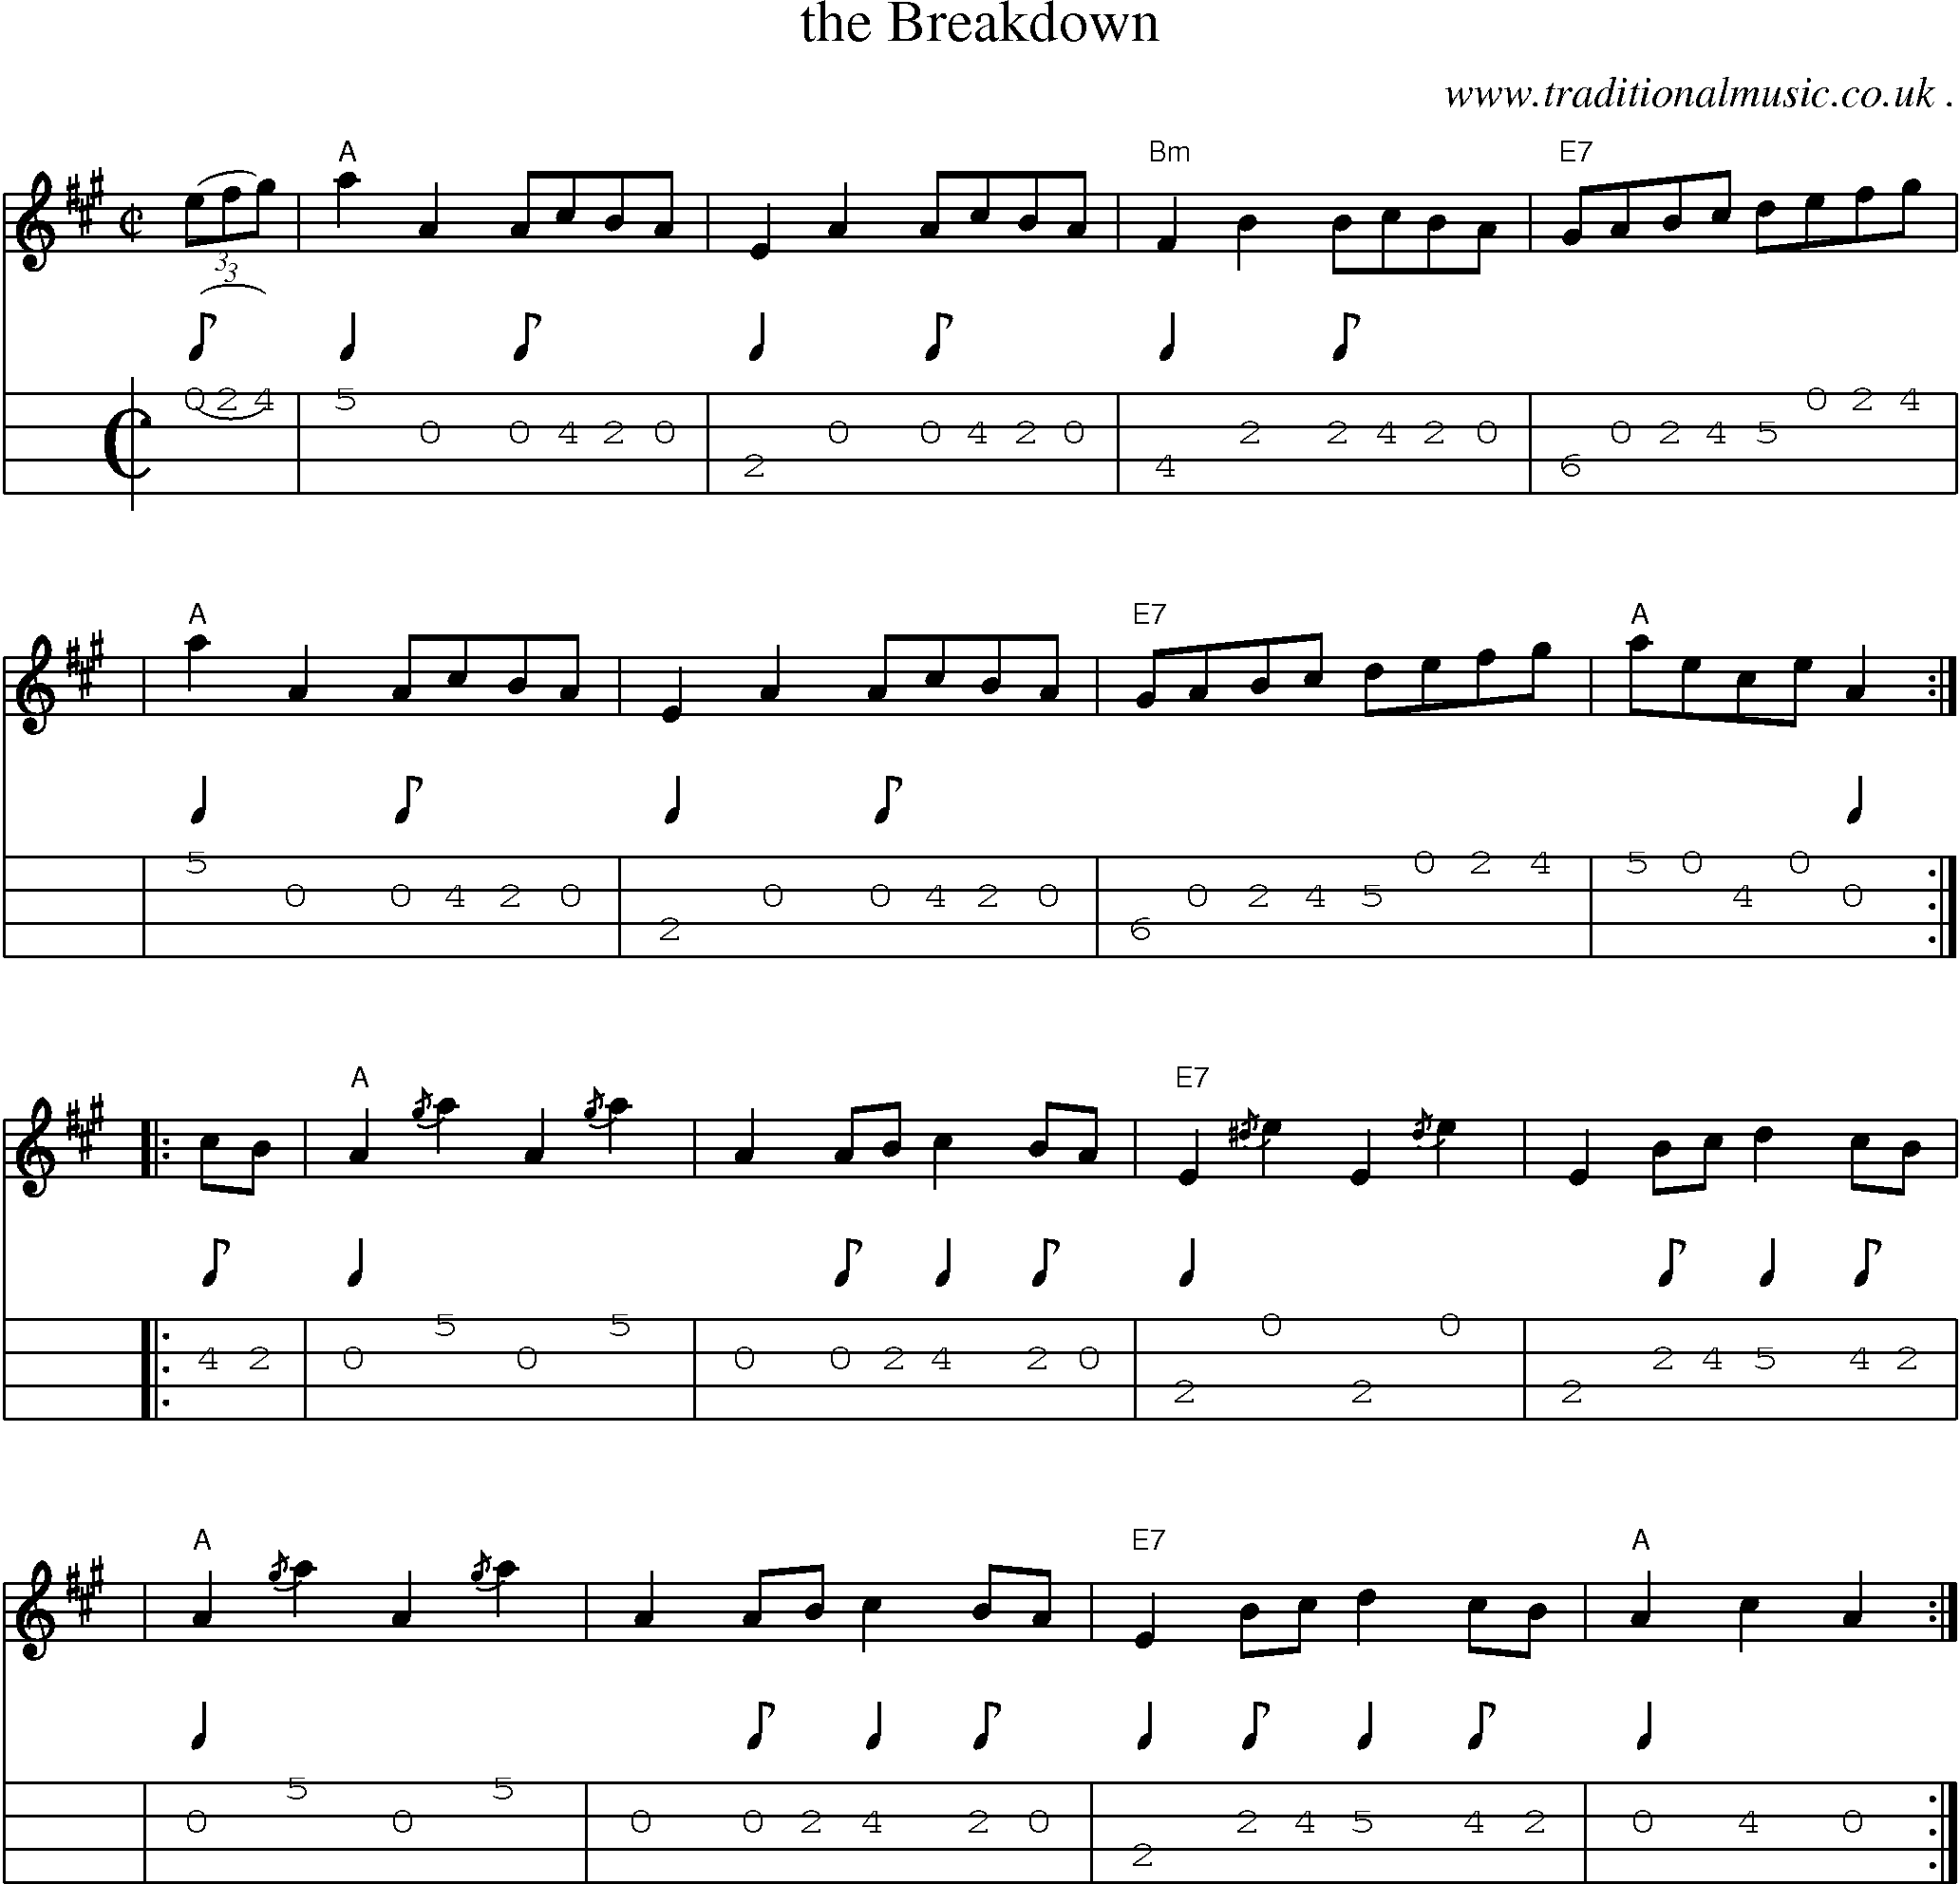 Sheet-music  score, Chords and Mandolin Tabs for The Breakdown